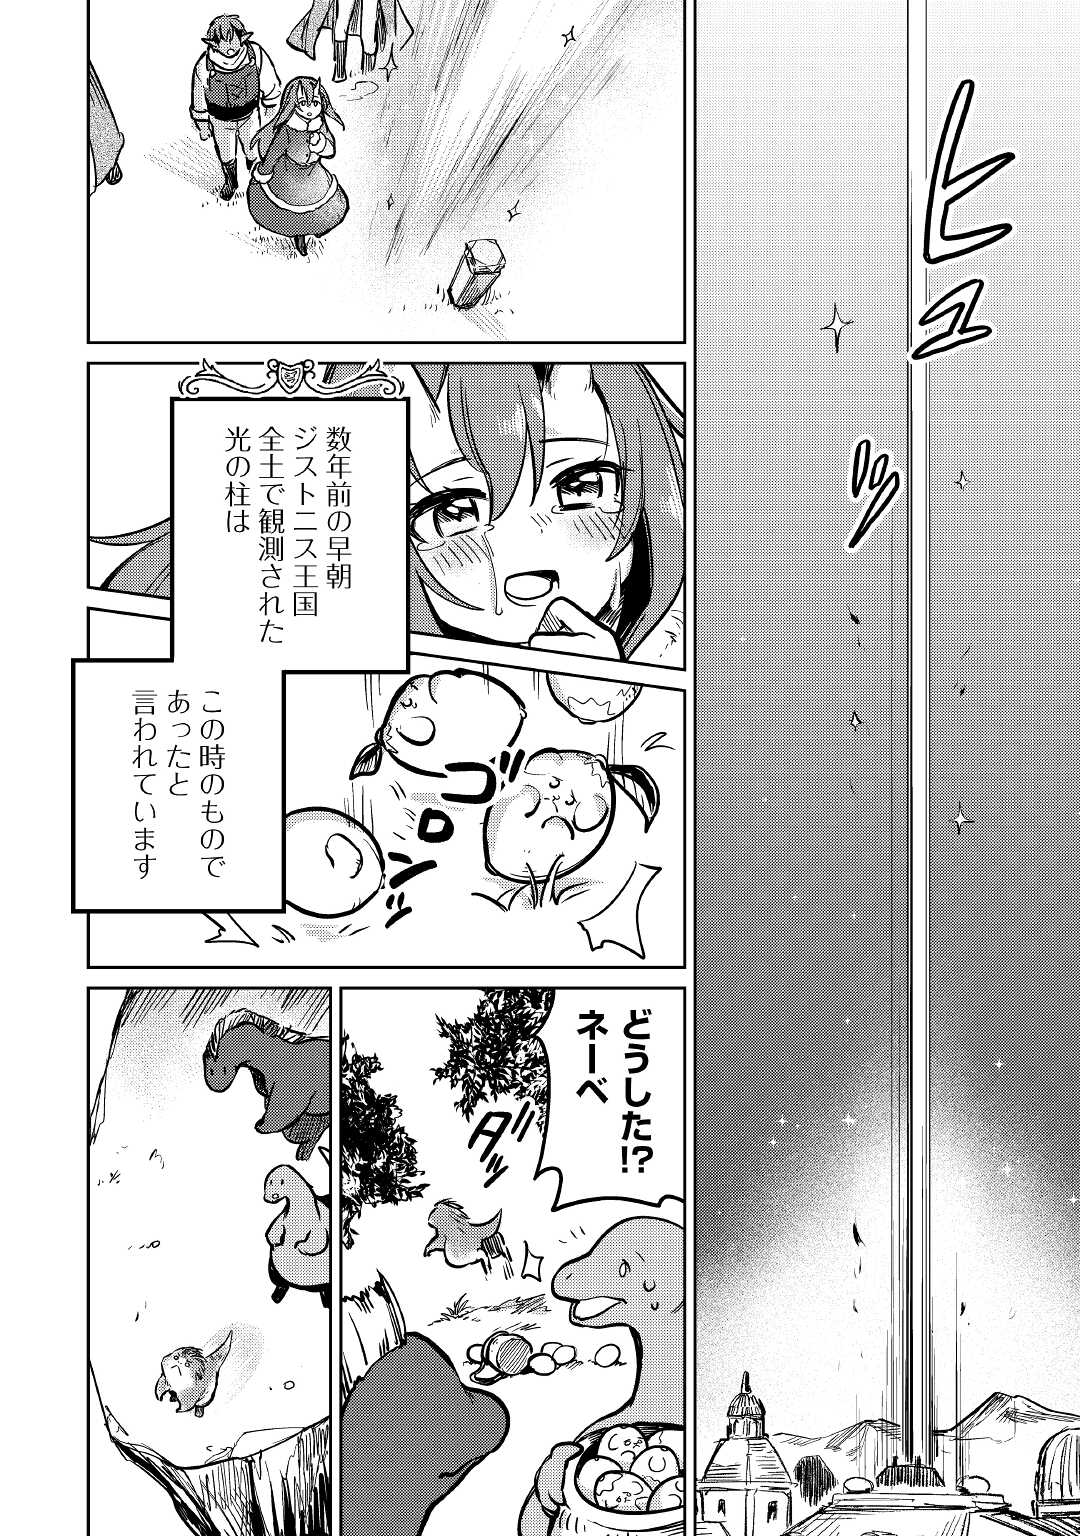 The Former Structural Researcher’s Story of Otherworldly Adventure 第41話 - Page 18